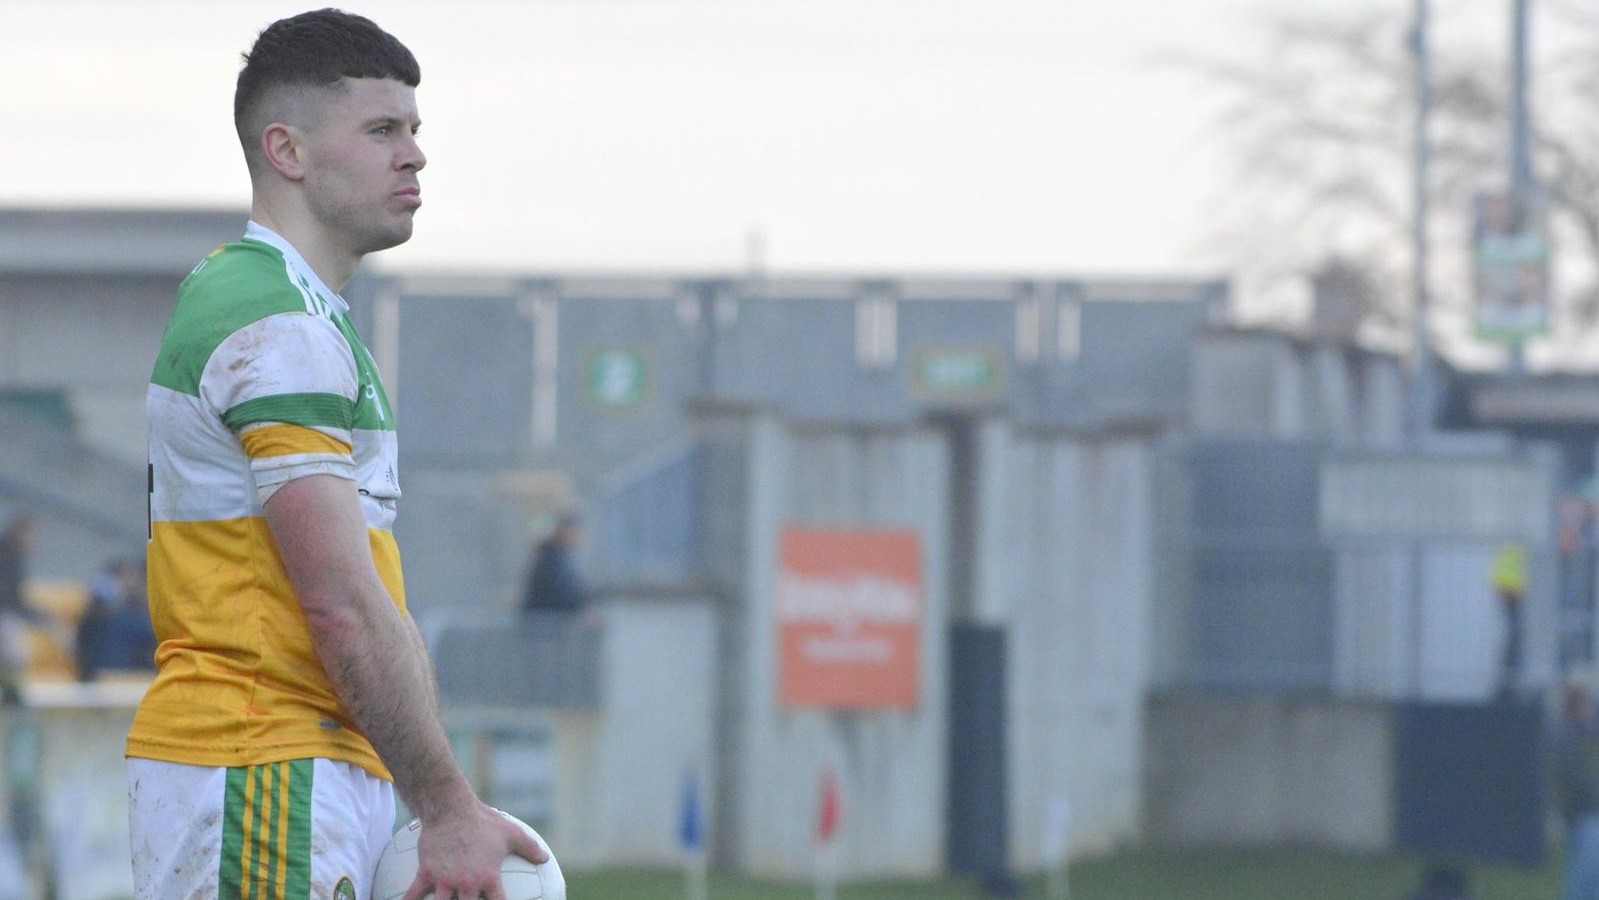 Offaly Advance With Hard-Earned Win Over Carlow